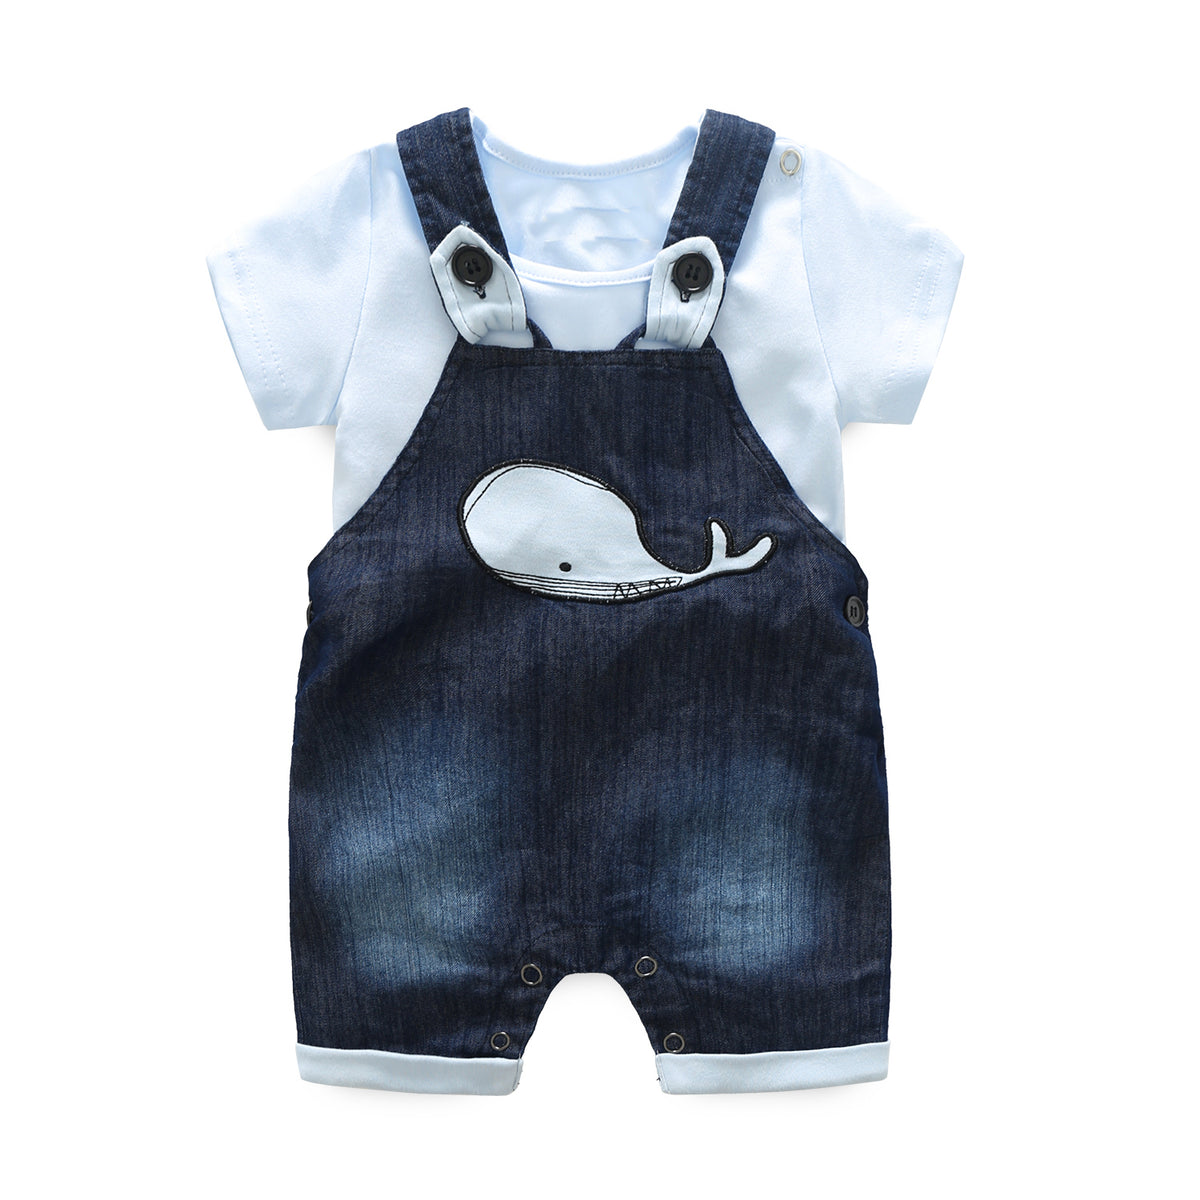 Boy's Sea Blue denim overalls and short-sleeved body suit